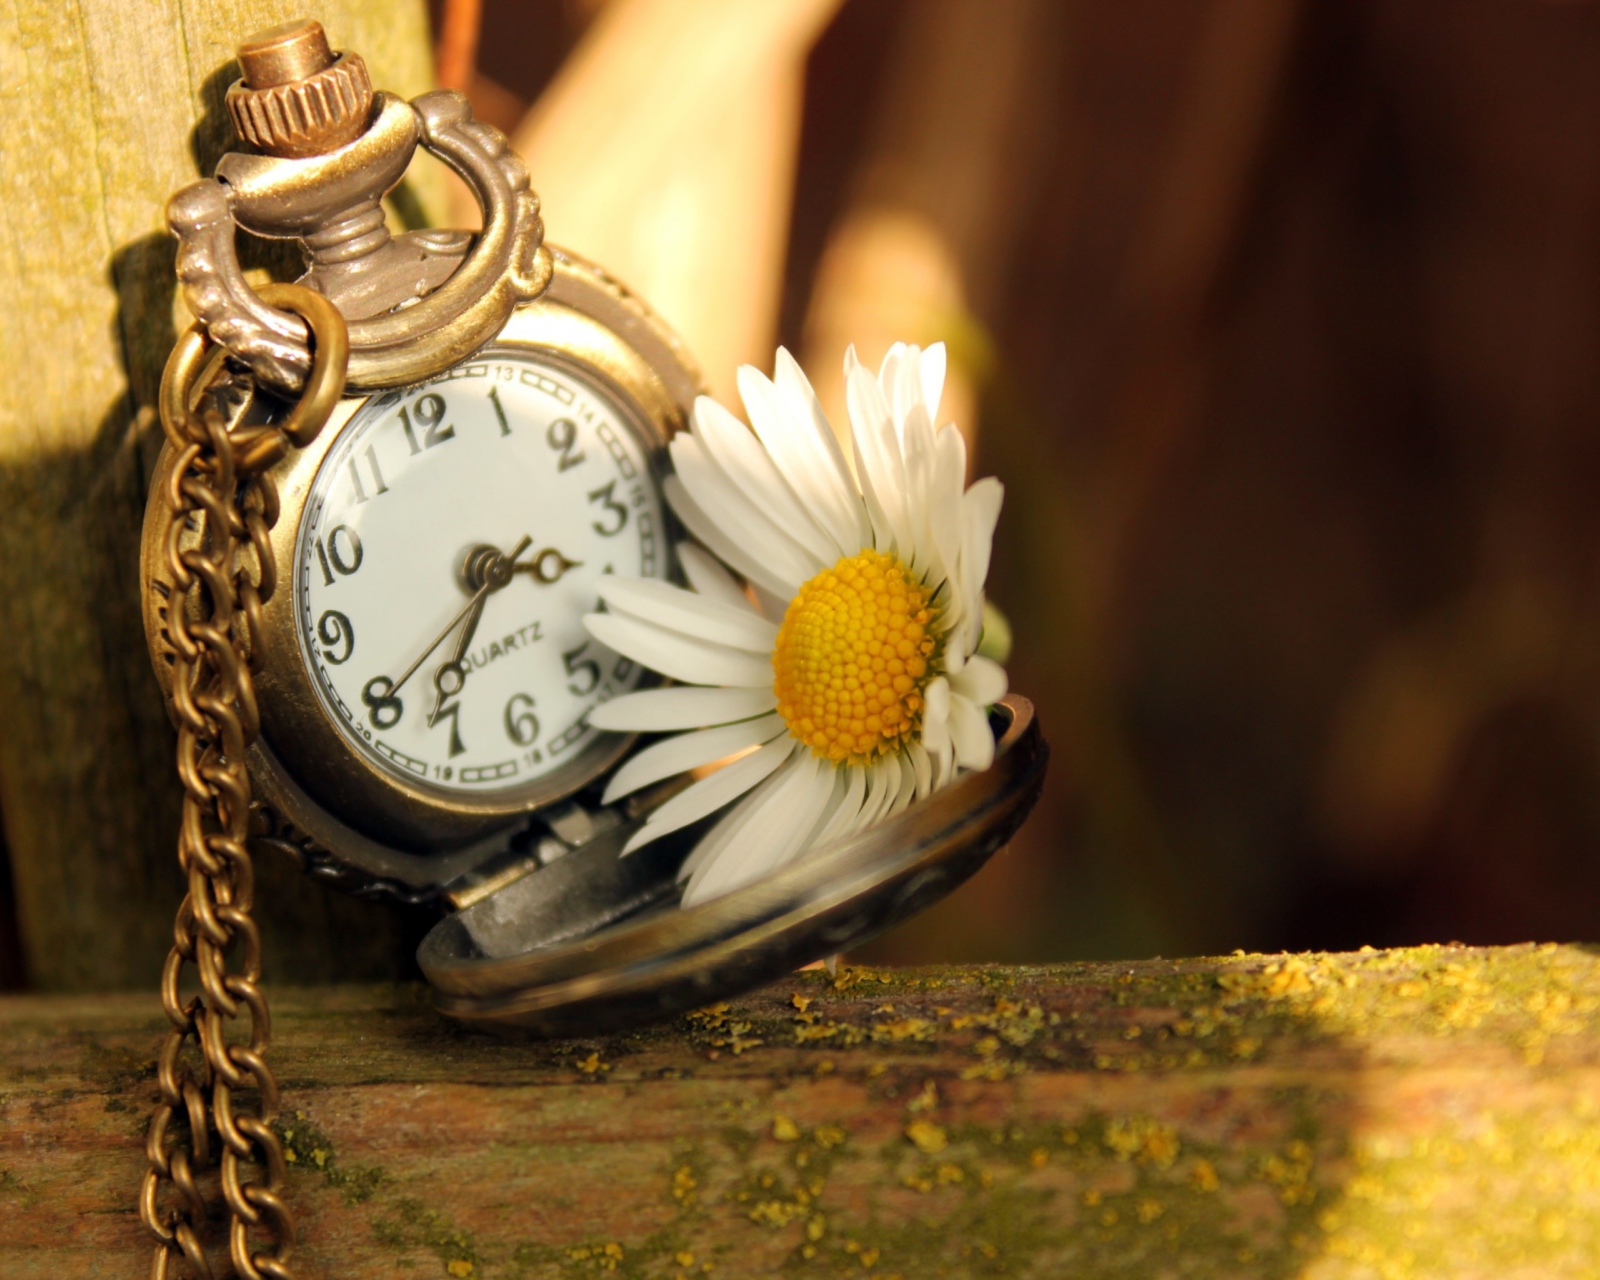 Vintage Watch And Daisy wallpaper 1600x1280